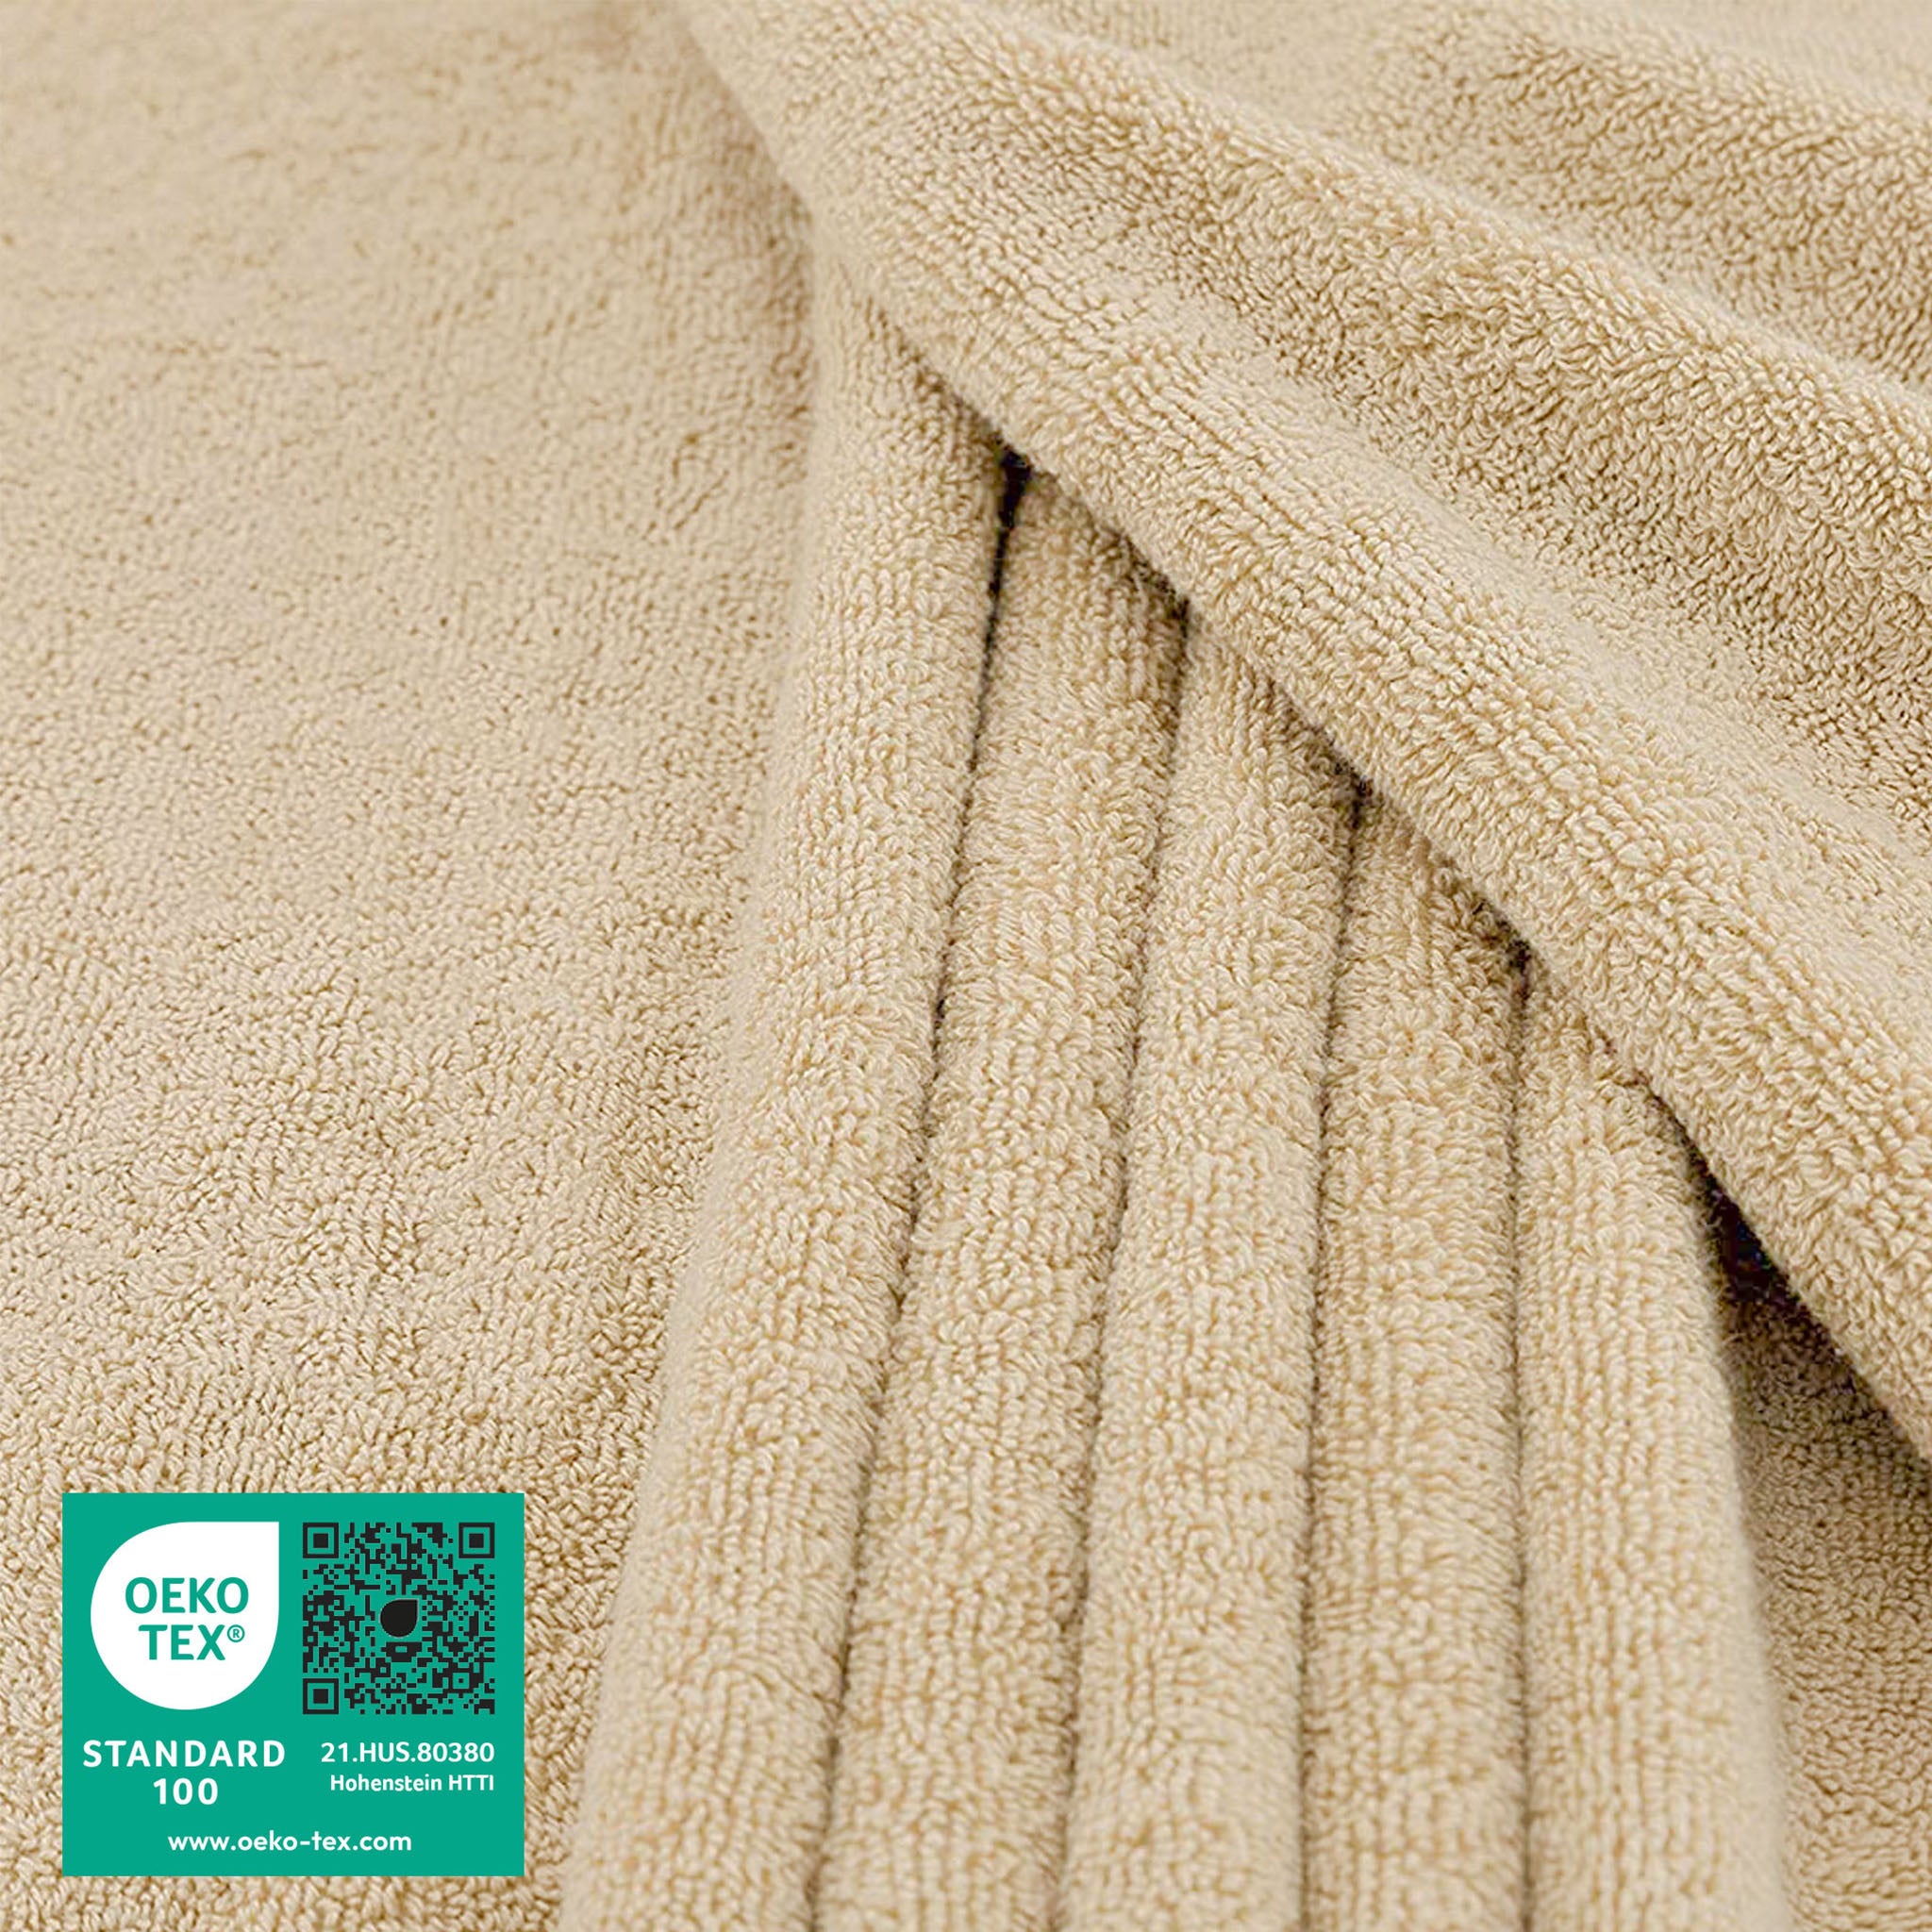 American Soft Linen 100% Ring Spun Cotton 40x80 Inches Oversized Bath Sheets sand-taupe-2